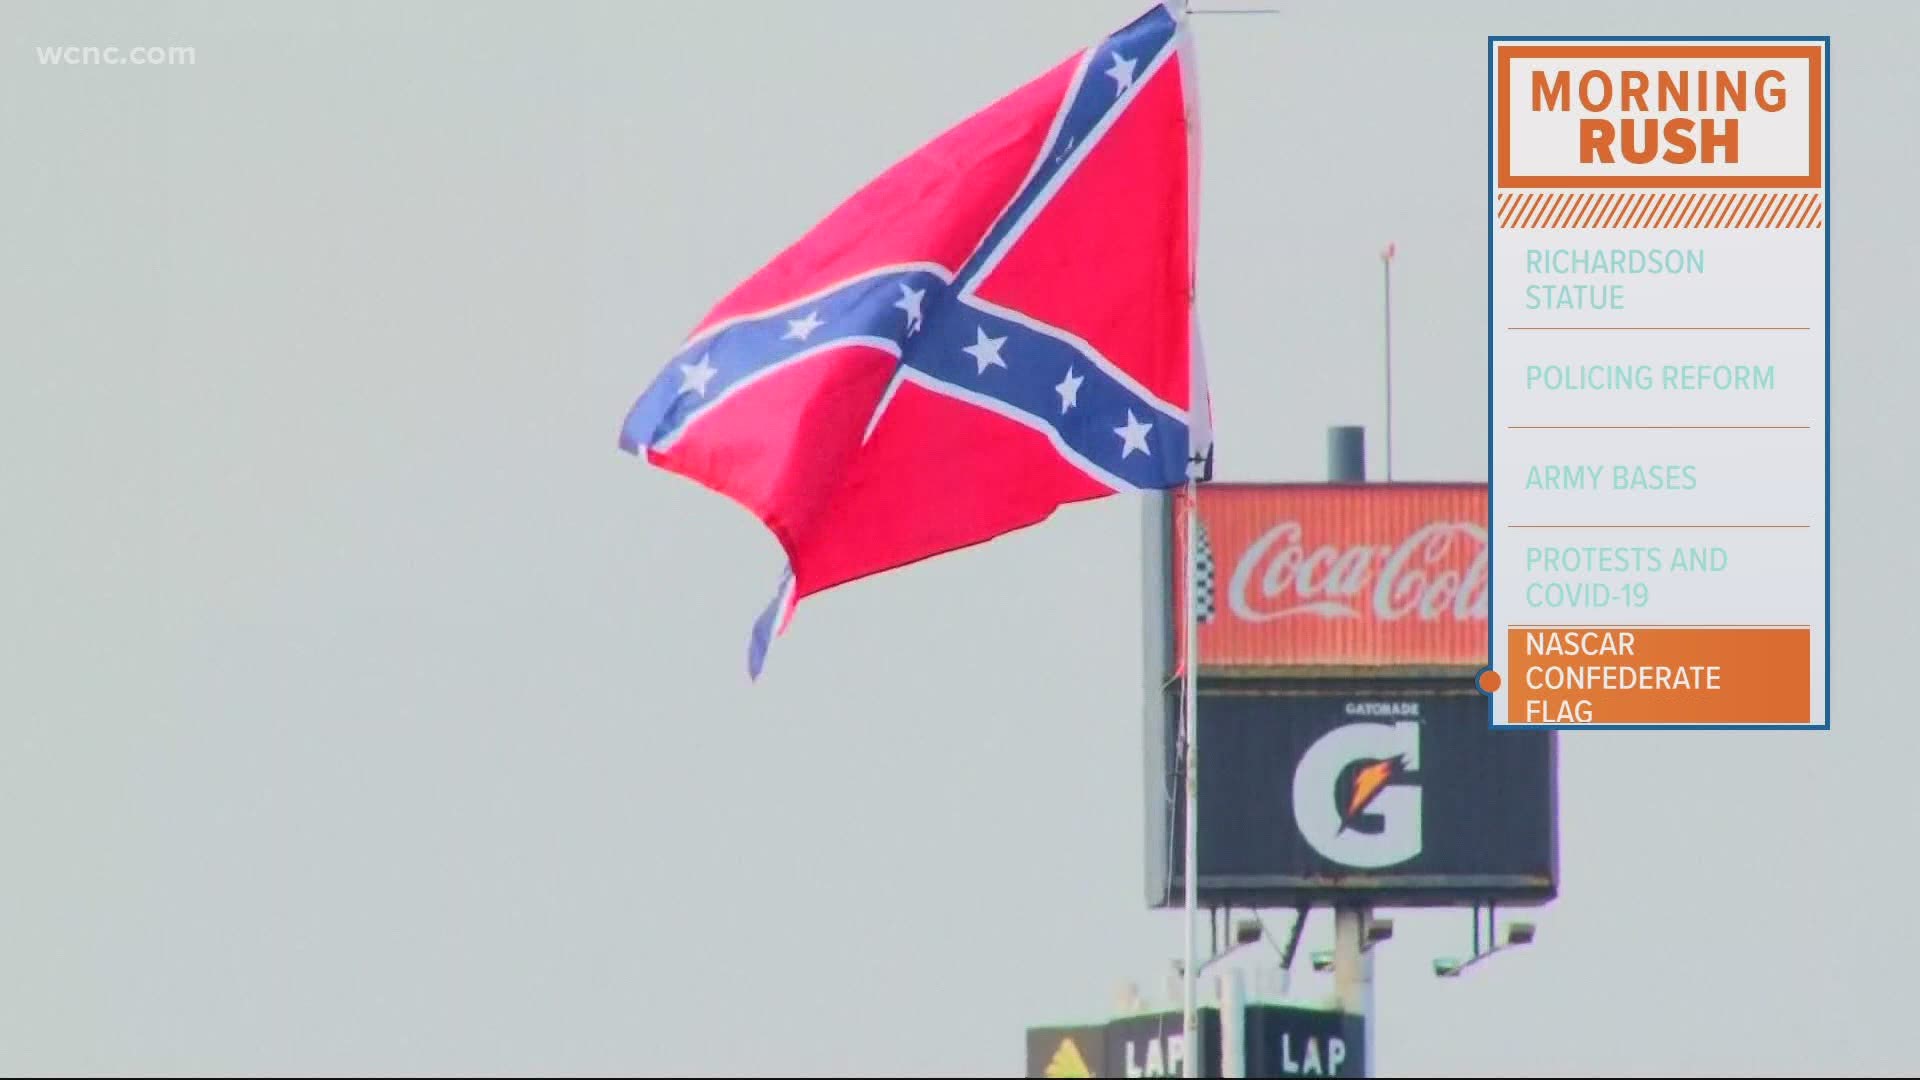 NASCAR announced it will ban the Confederate flag from all of its events moving forward after Bubba Wallace called for it to be banned.